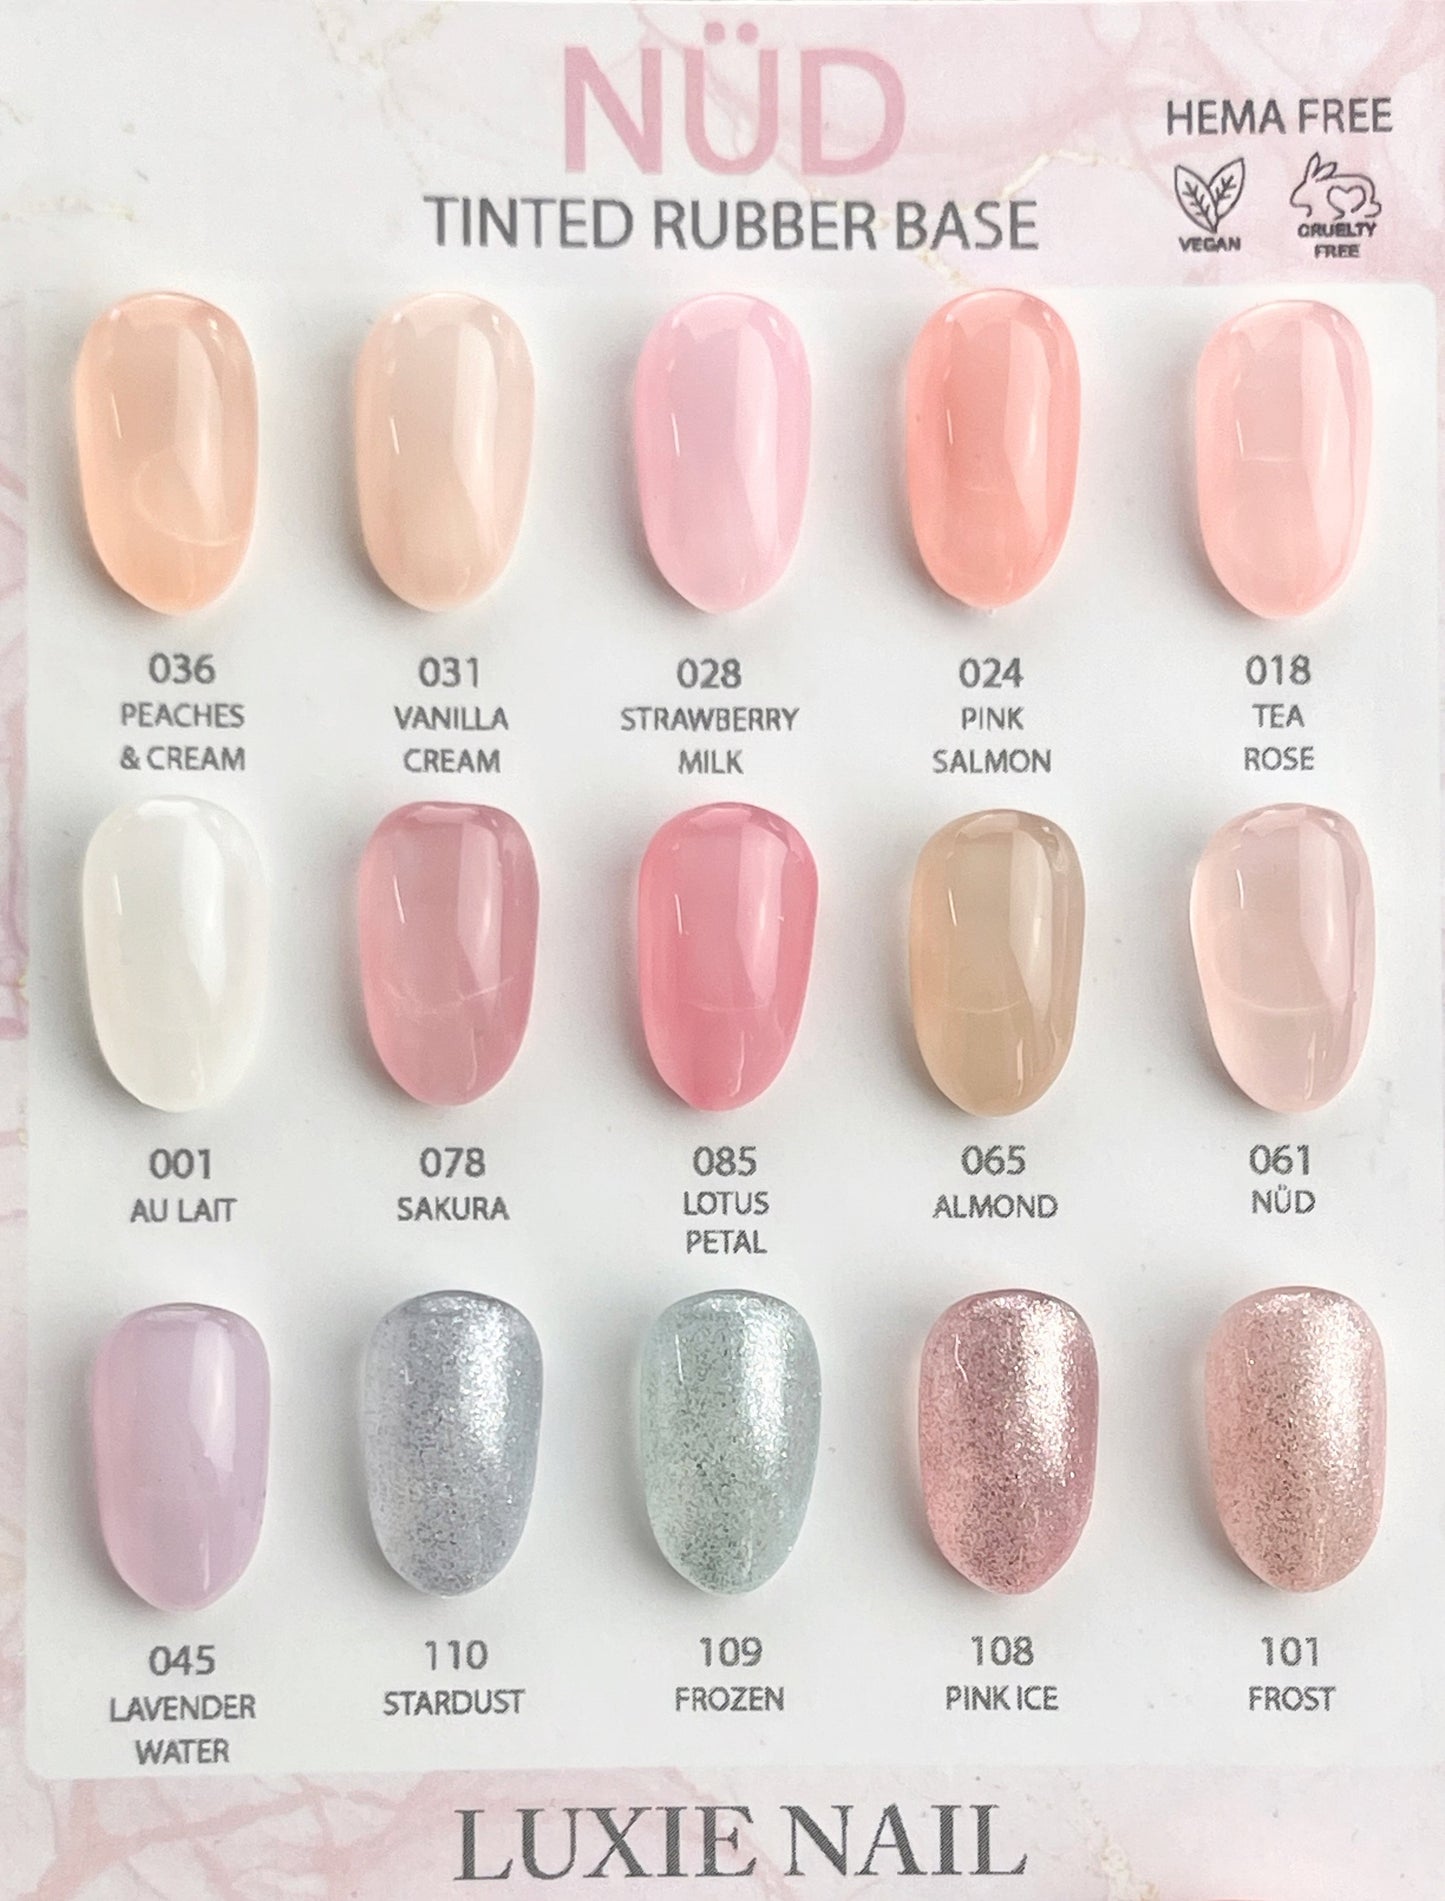 NÜD Tinted Rubber Base Collection 15 Shades